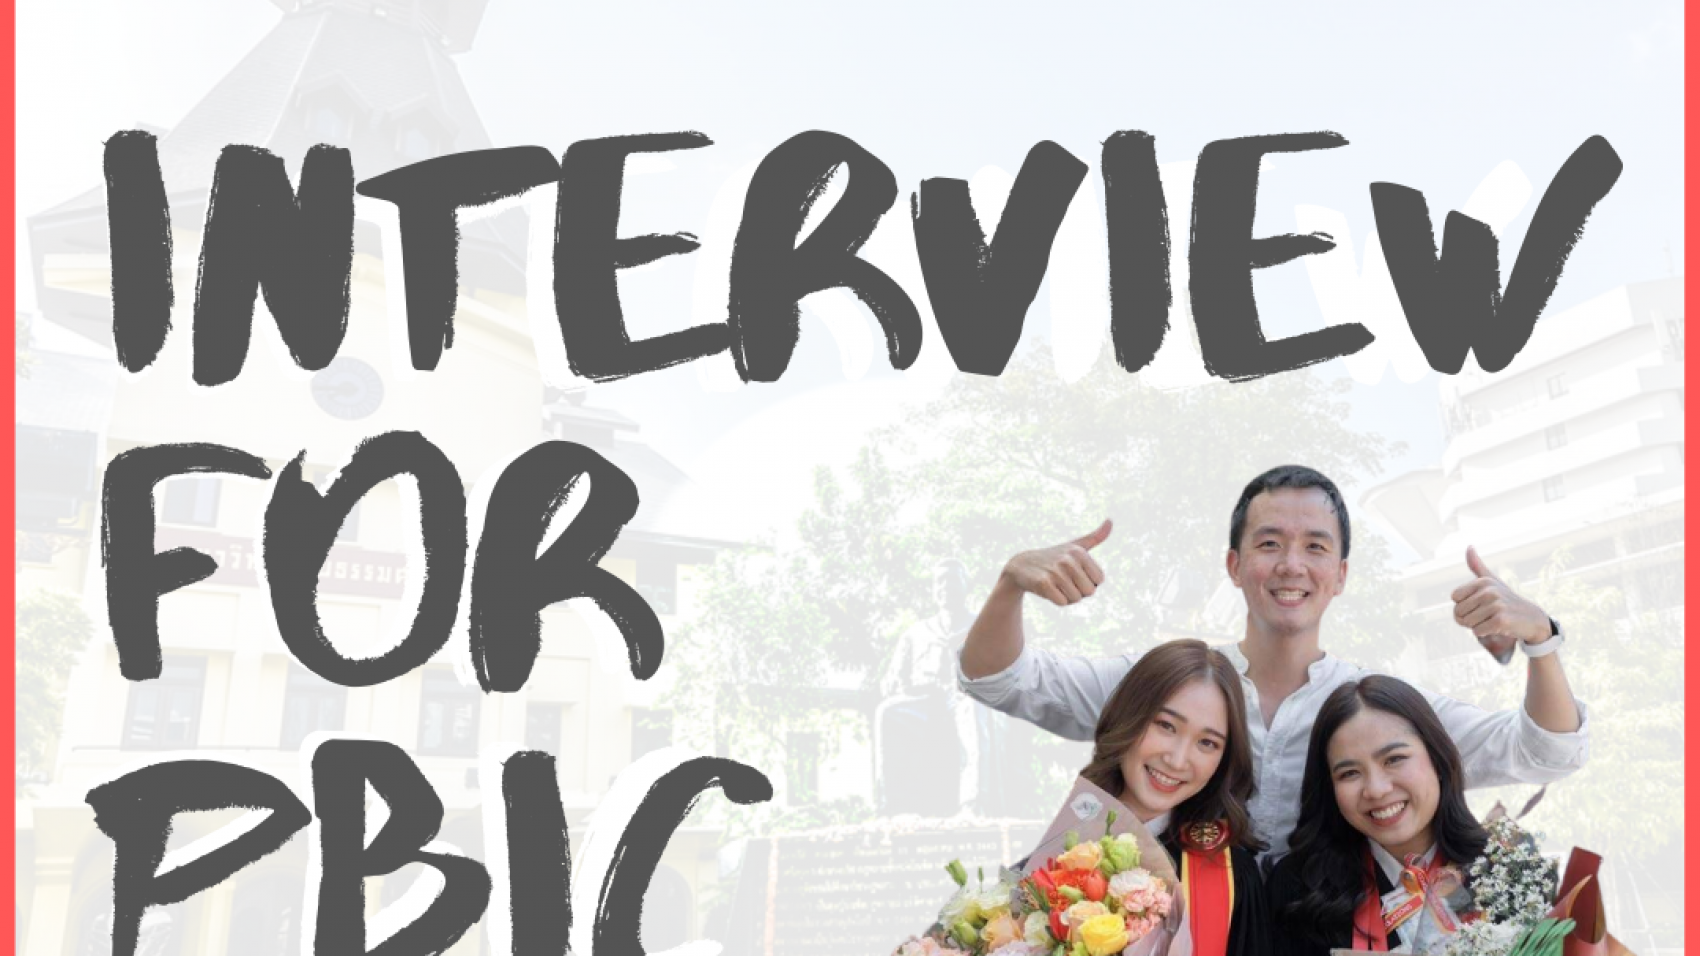 Interview for PBIC